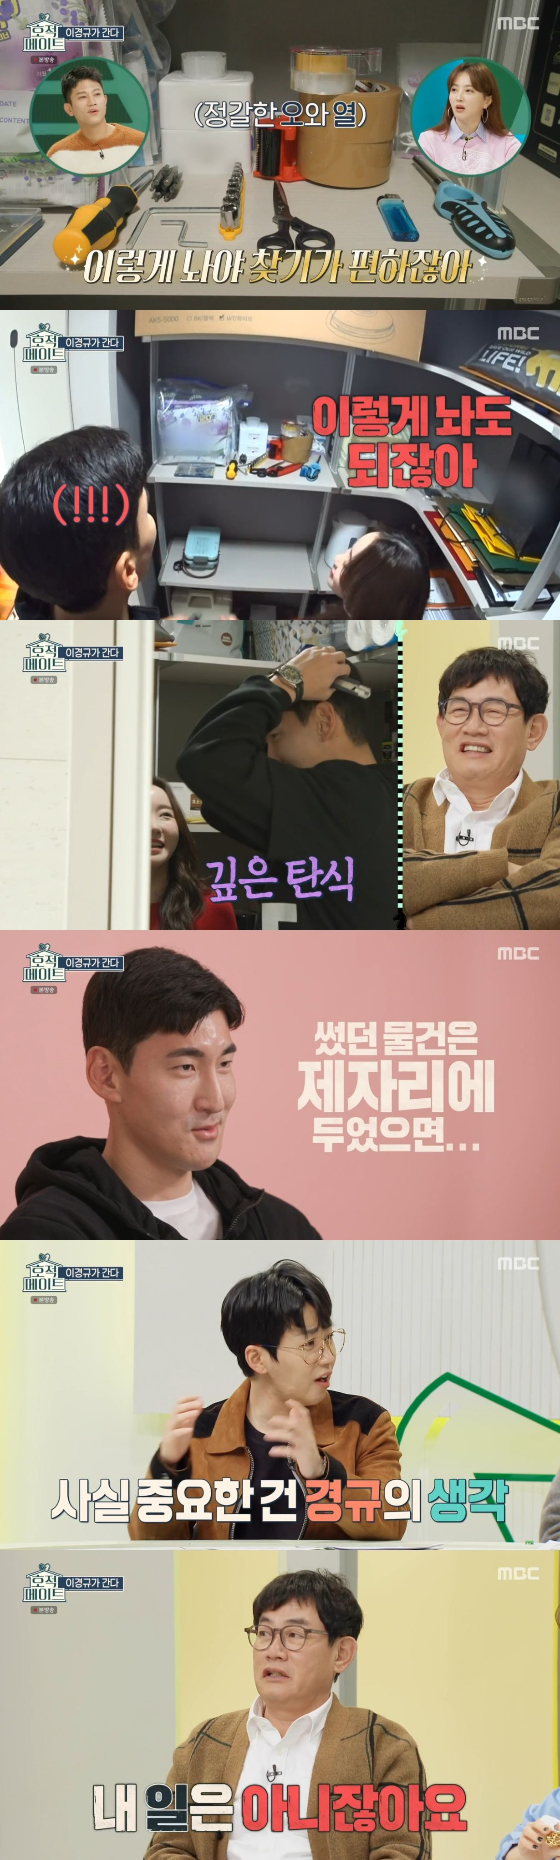 In the MBC entertainment program Family register colleague broadcasted on the 8th, Lee Kyung-kyus only daughter, Yerims newlywed house, was released.Yerim married Kim Young-chan, a soccer player from Gyeongnam FC, last December.On the same day, Kim Young-chan nagged Ye-rim, who was not good at organizing the event, and Kim Young-chan showed a neat arrangement as an athlete.So, Yelim said, You only have to put it in place. He scattered the things Kim Young-chan had arranged and said, Can not you let it go like this?But Kim Young-chans constant nagging baptism followed, and DinDin asked, How about seeing your son-in-law nagging at your daughter?Lee Kyung-kyu laughed, answering coolly, Its not my job.